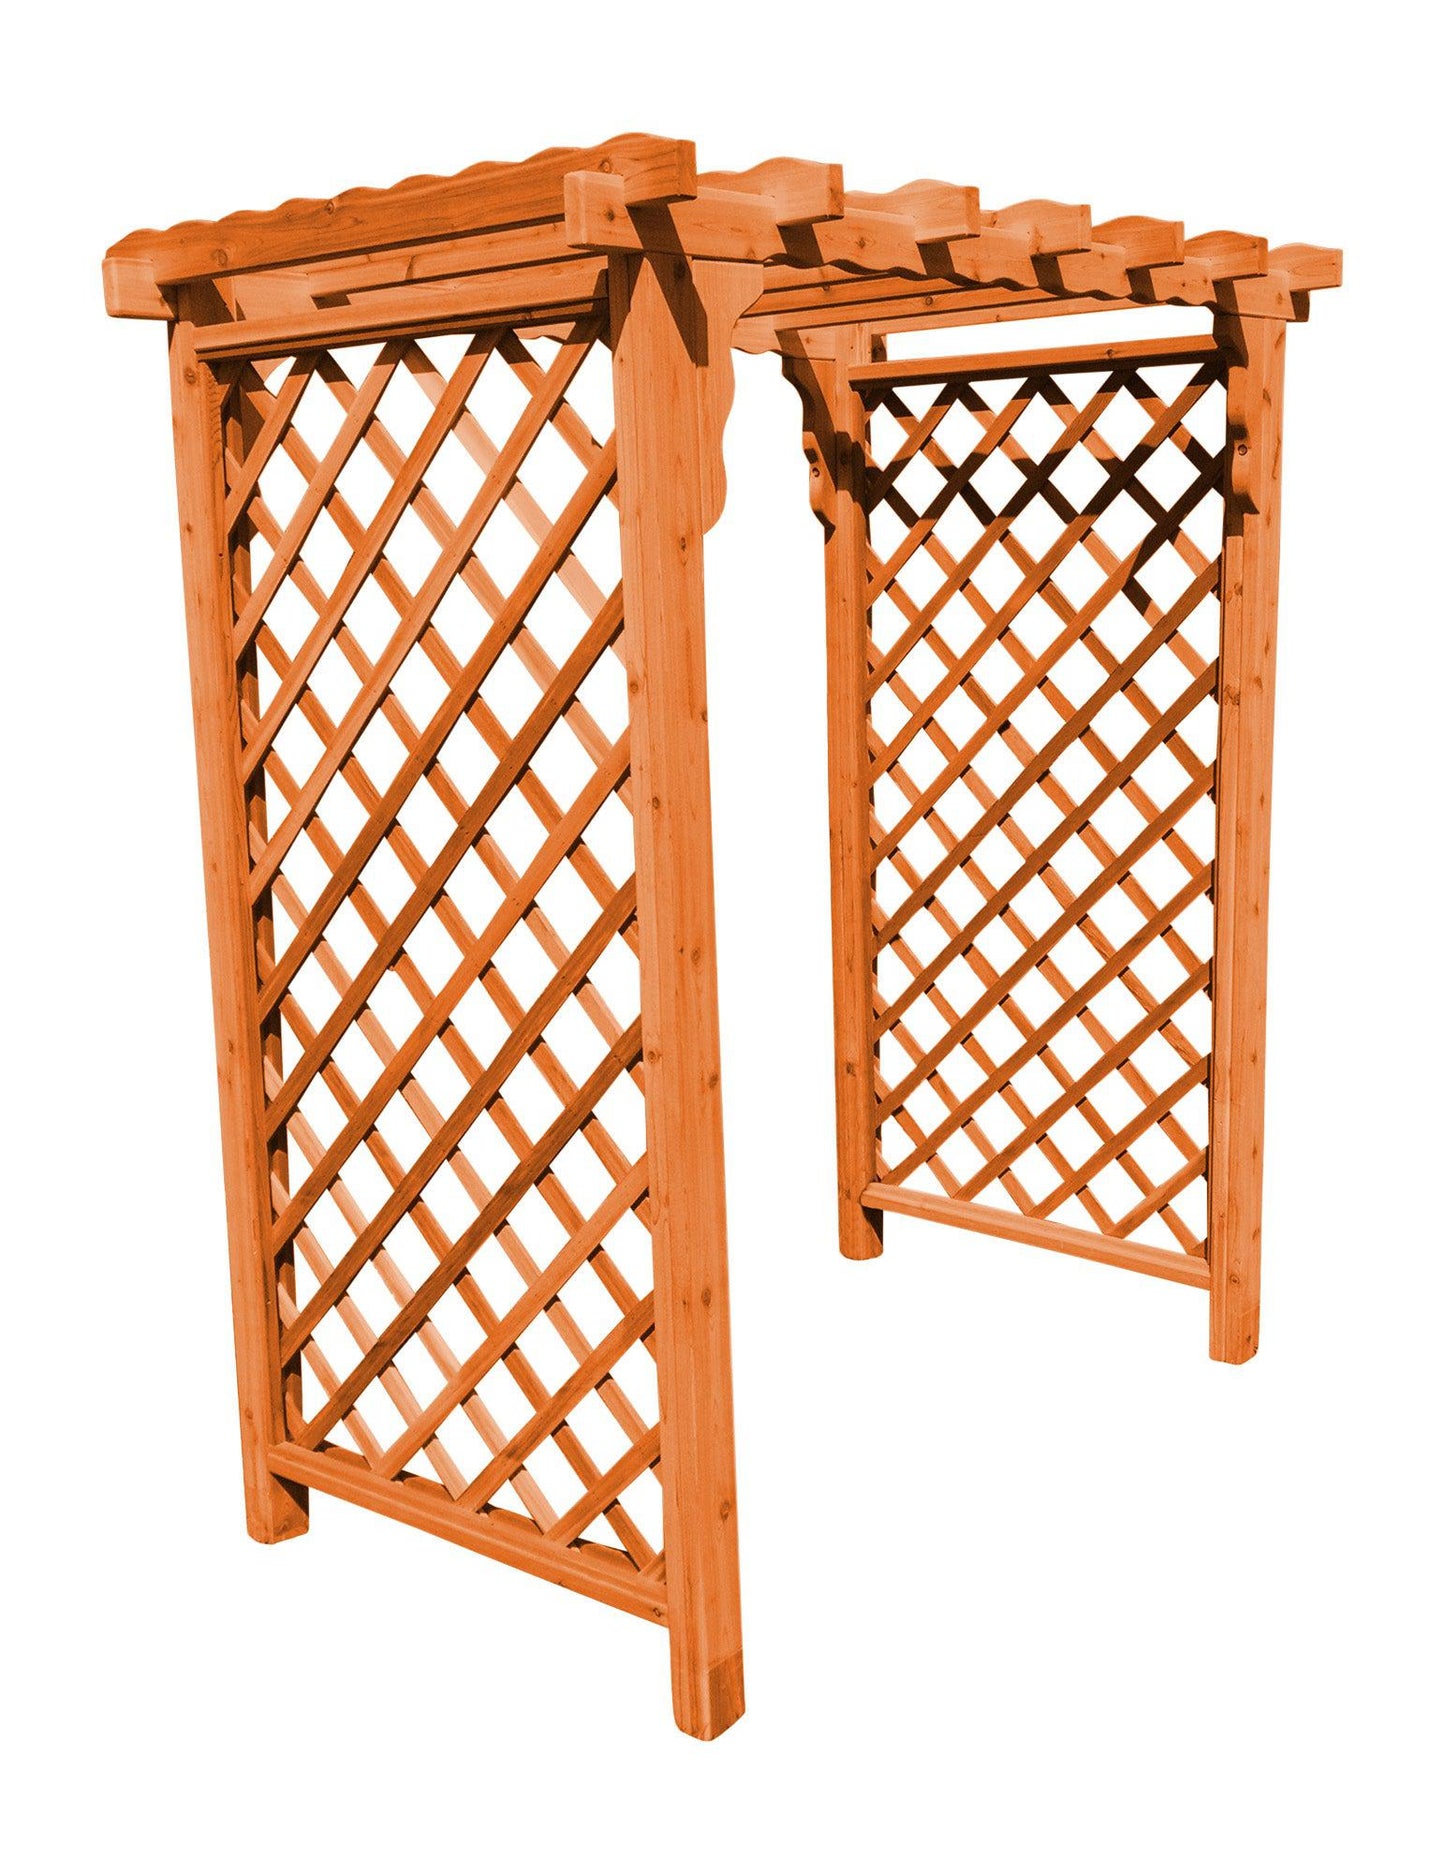 A&L Furniture Co. Western Red Cedar 5' Covington Arbor - LEAD TIME TO SHIP 2 WEEKS